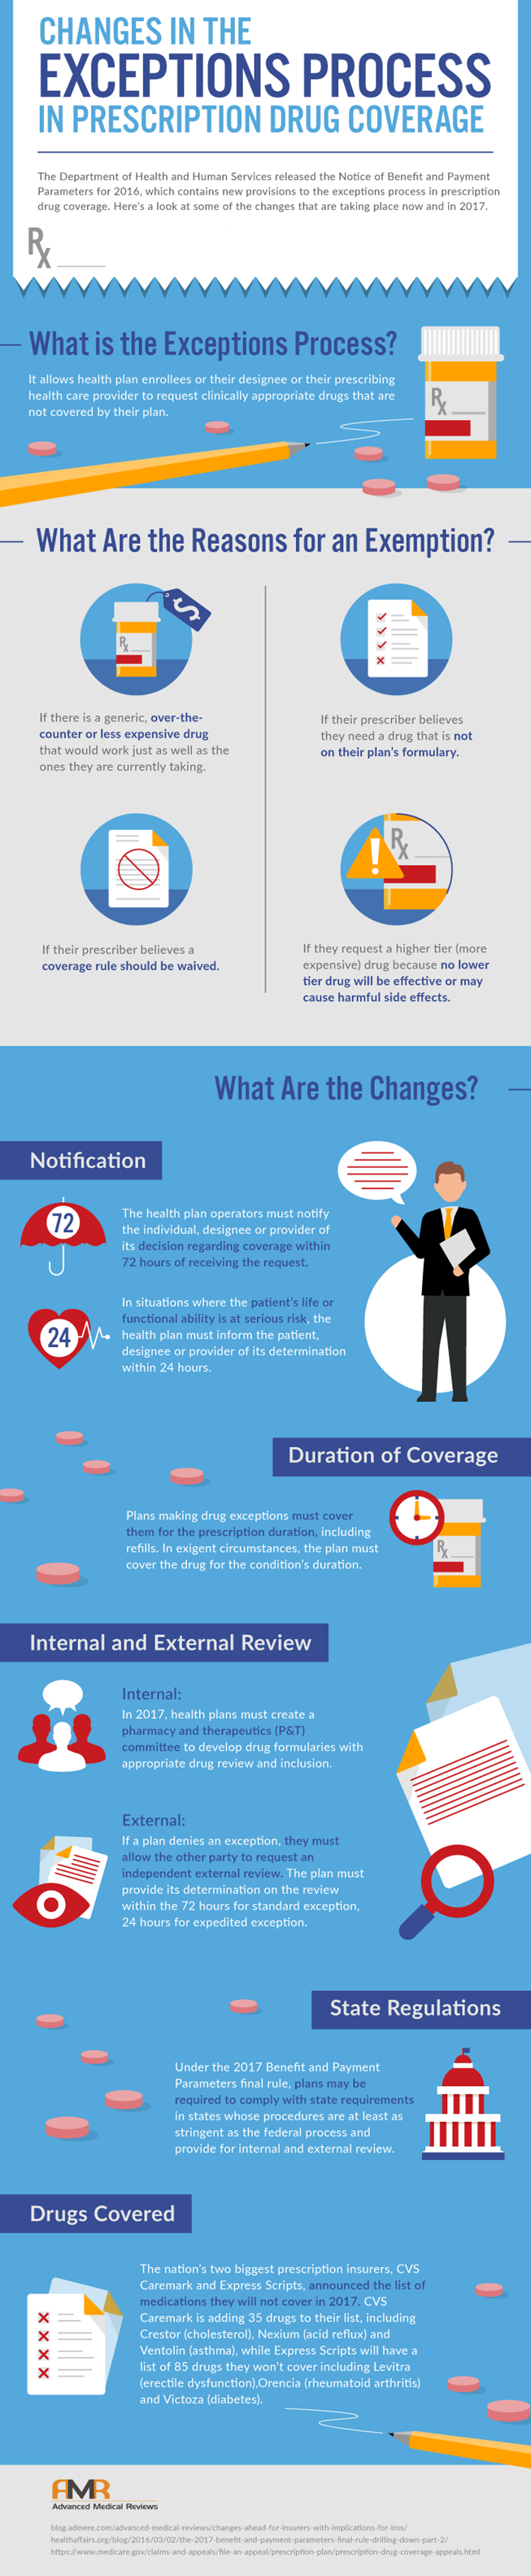 Infograhpic on changes in the exceptions process for prescription coverage.